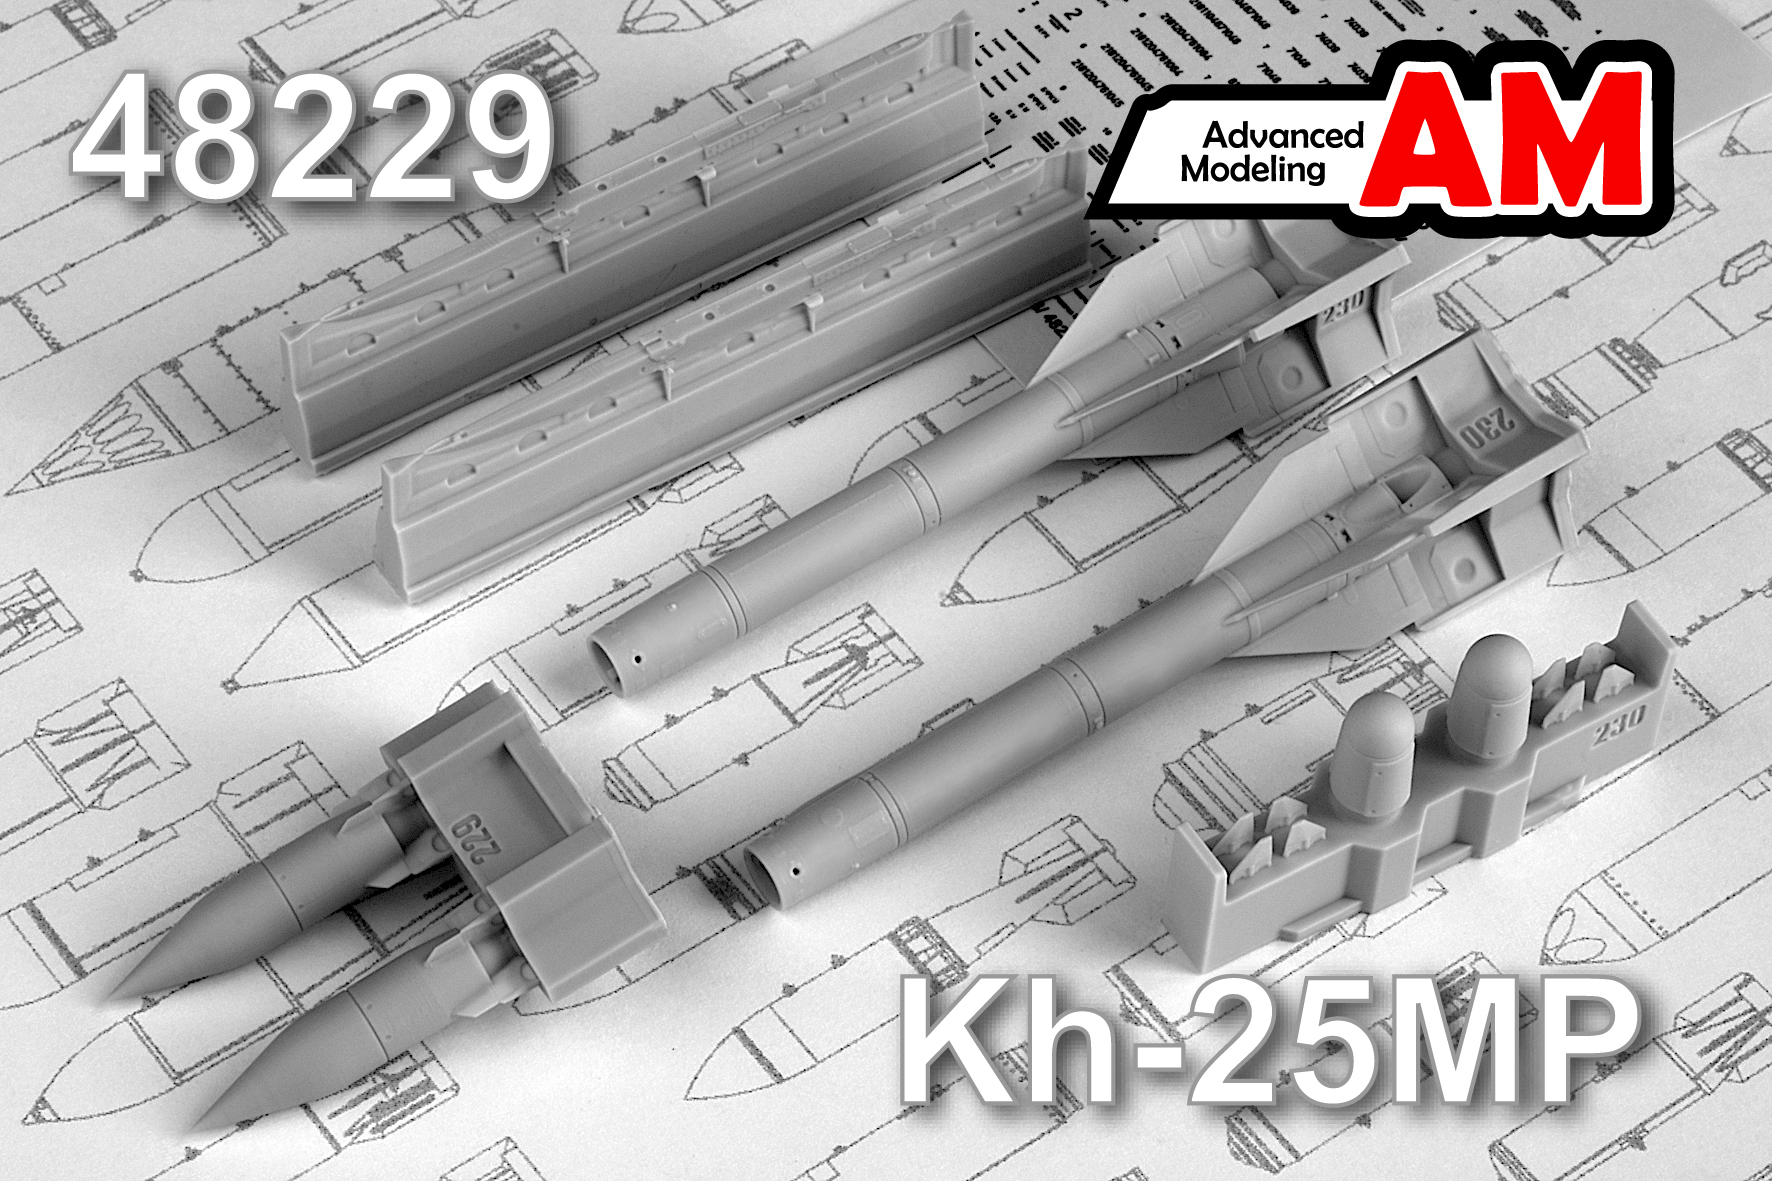 Additions (3D resin printing) 1/48 Aircraft guided missile Kh-25MP2 with launcher APU-68UM2 (Advanced Modeling) 